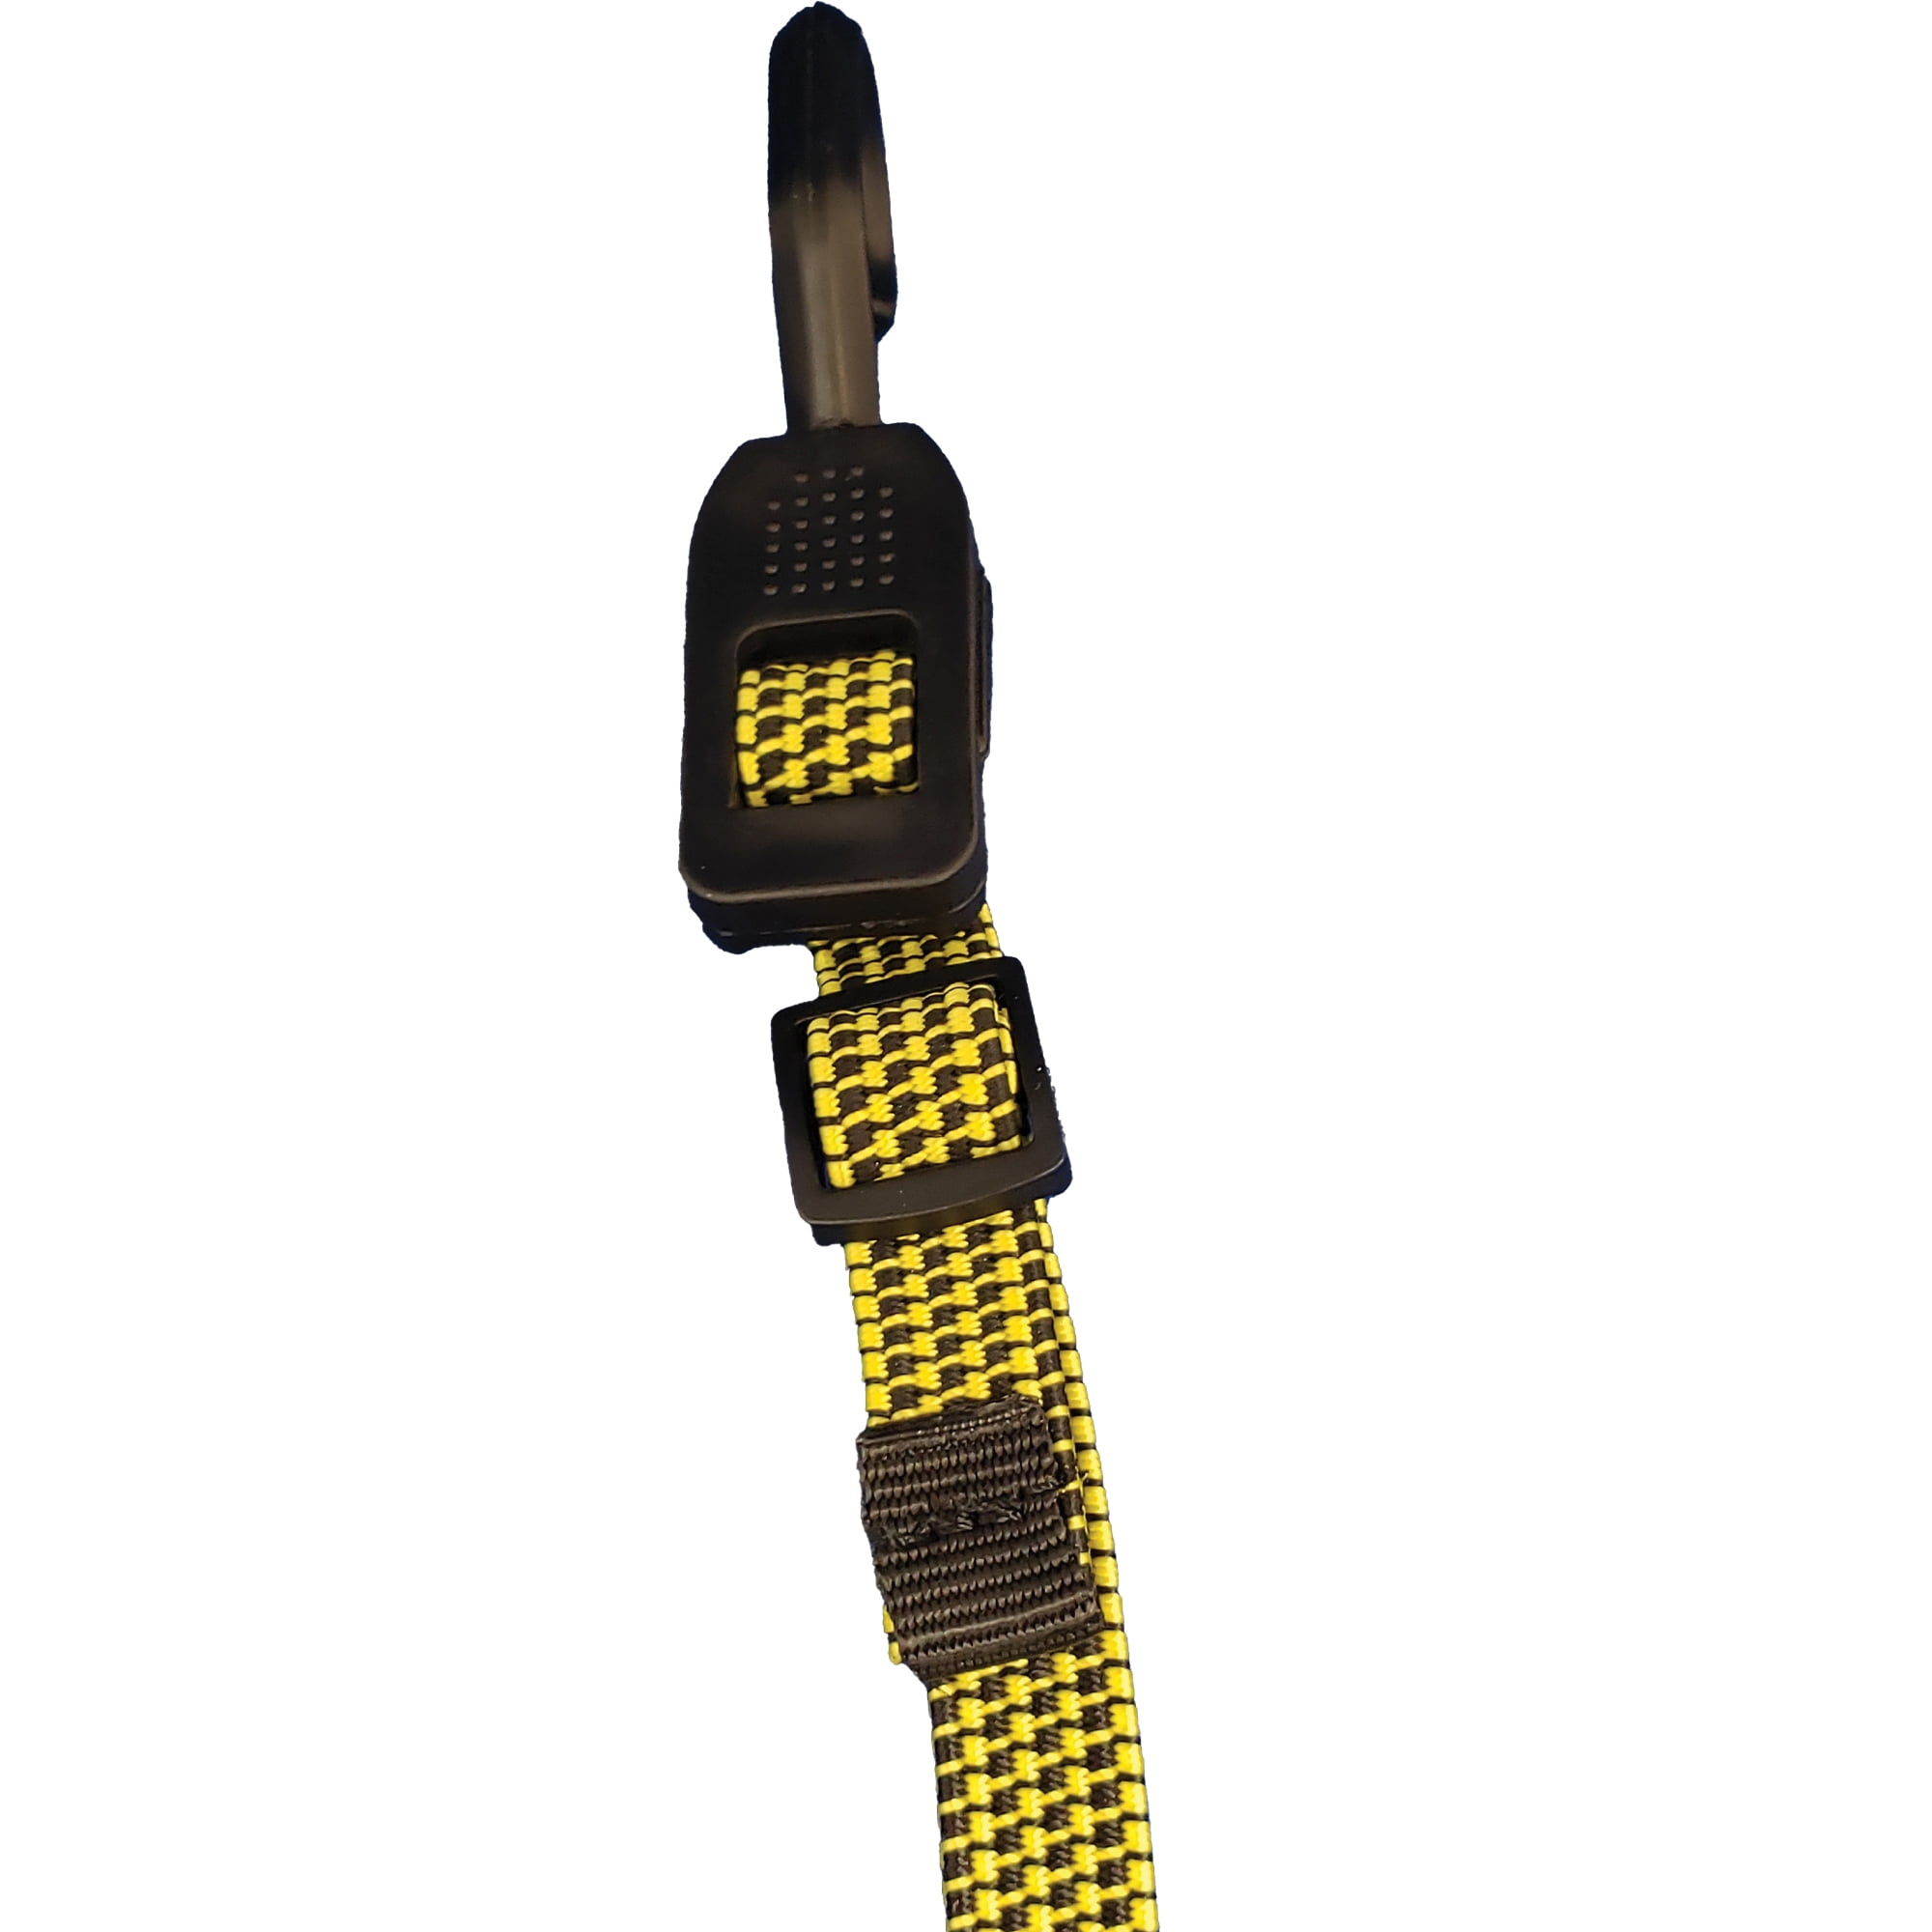 Buy Bicep Strap Products Online in Karachi at Best Prices on